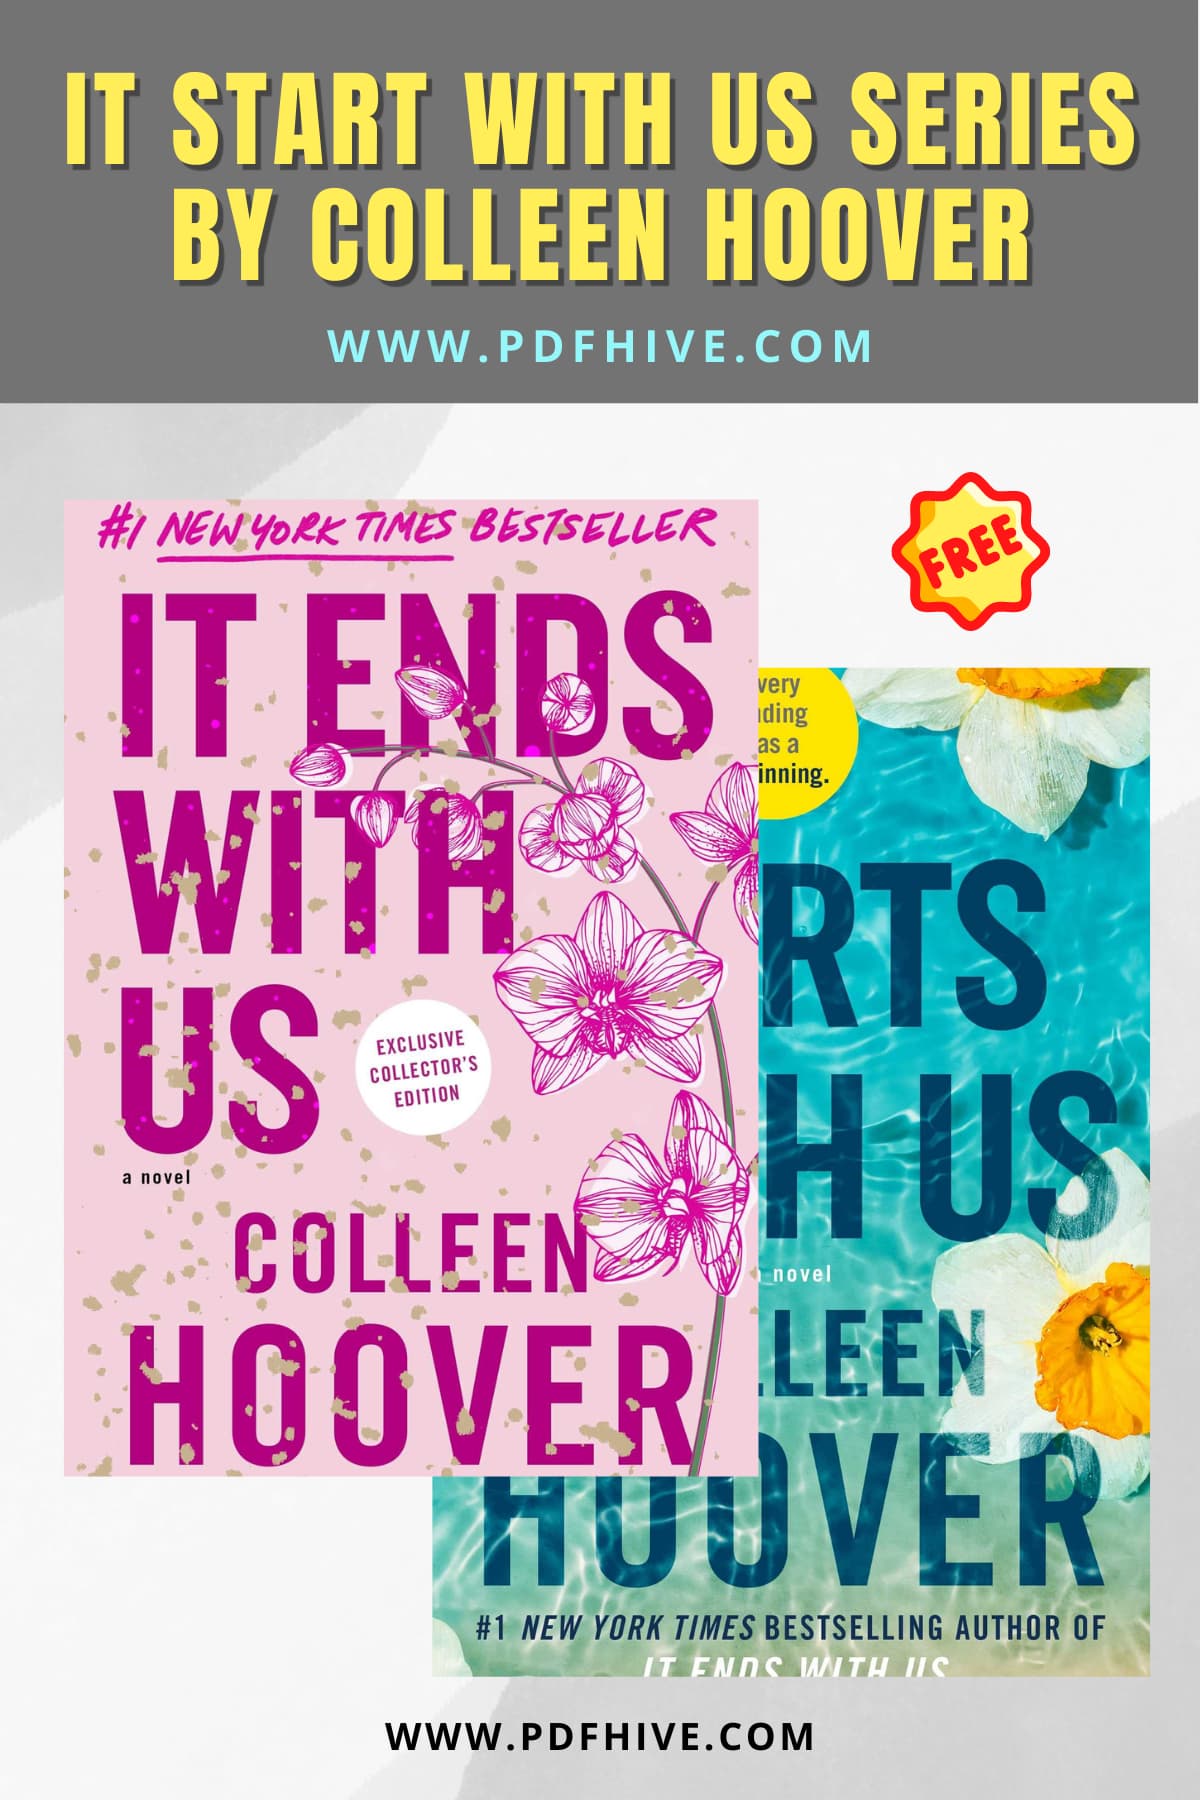 Book Series, Books Series In Order, Colleen Hoover Books In Order, Contemporary Romance, Fiction, It Ends With Us Books In Order, It Ends With Us series, Romance, Women's Fiction